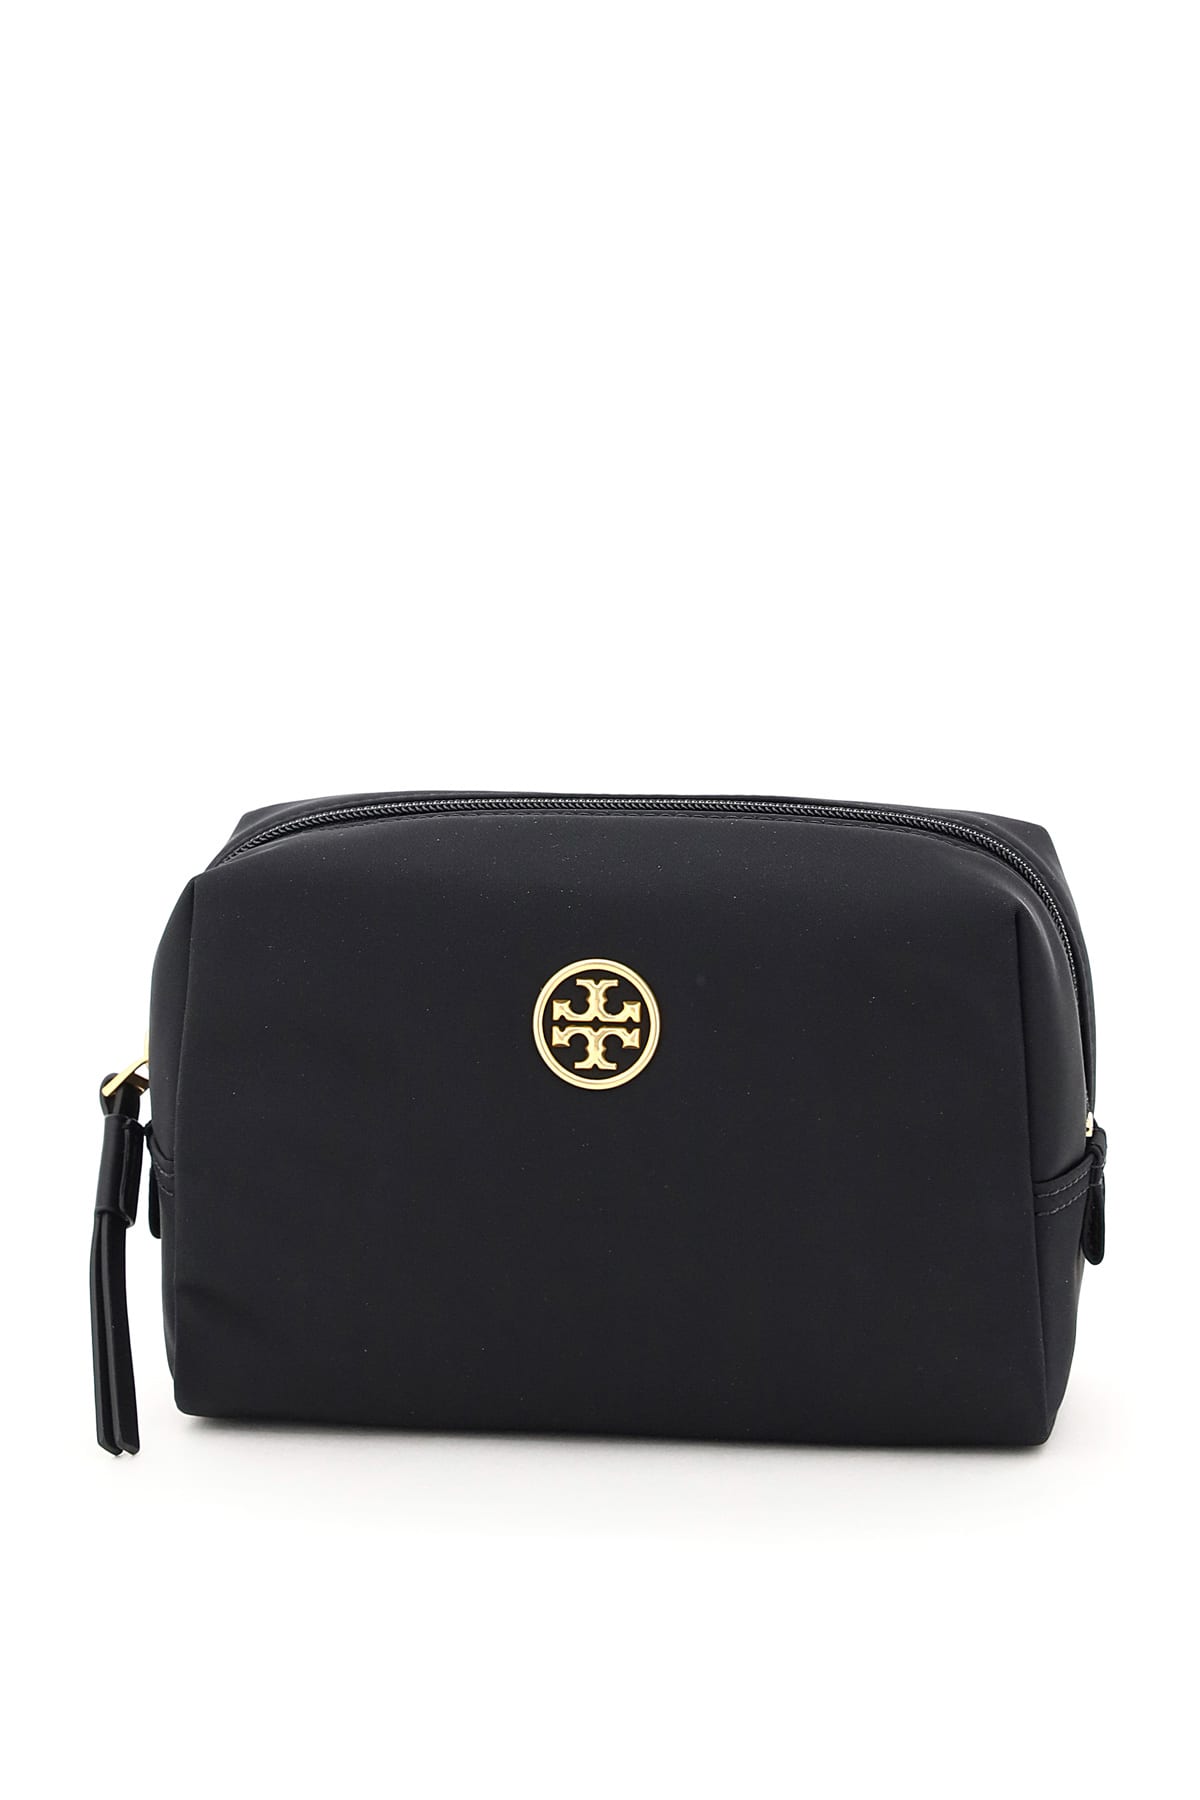 Tory Burch Piper Small Pouch Cosmetic Case